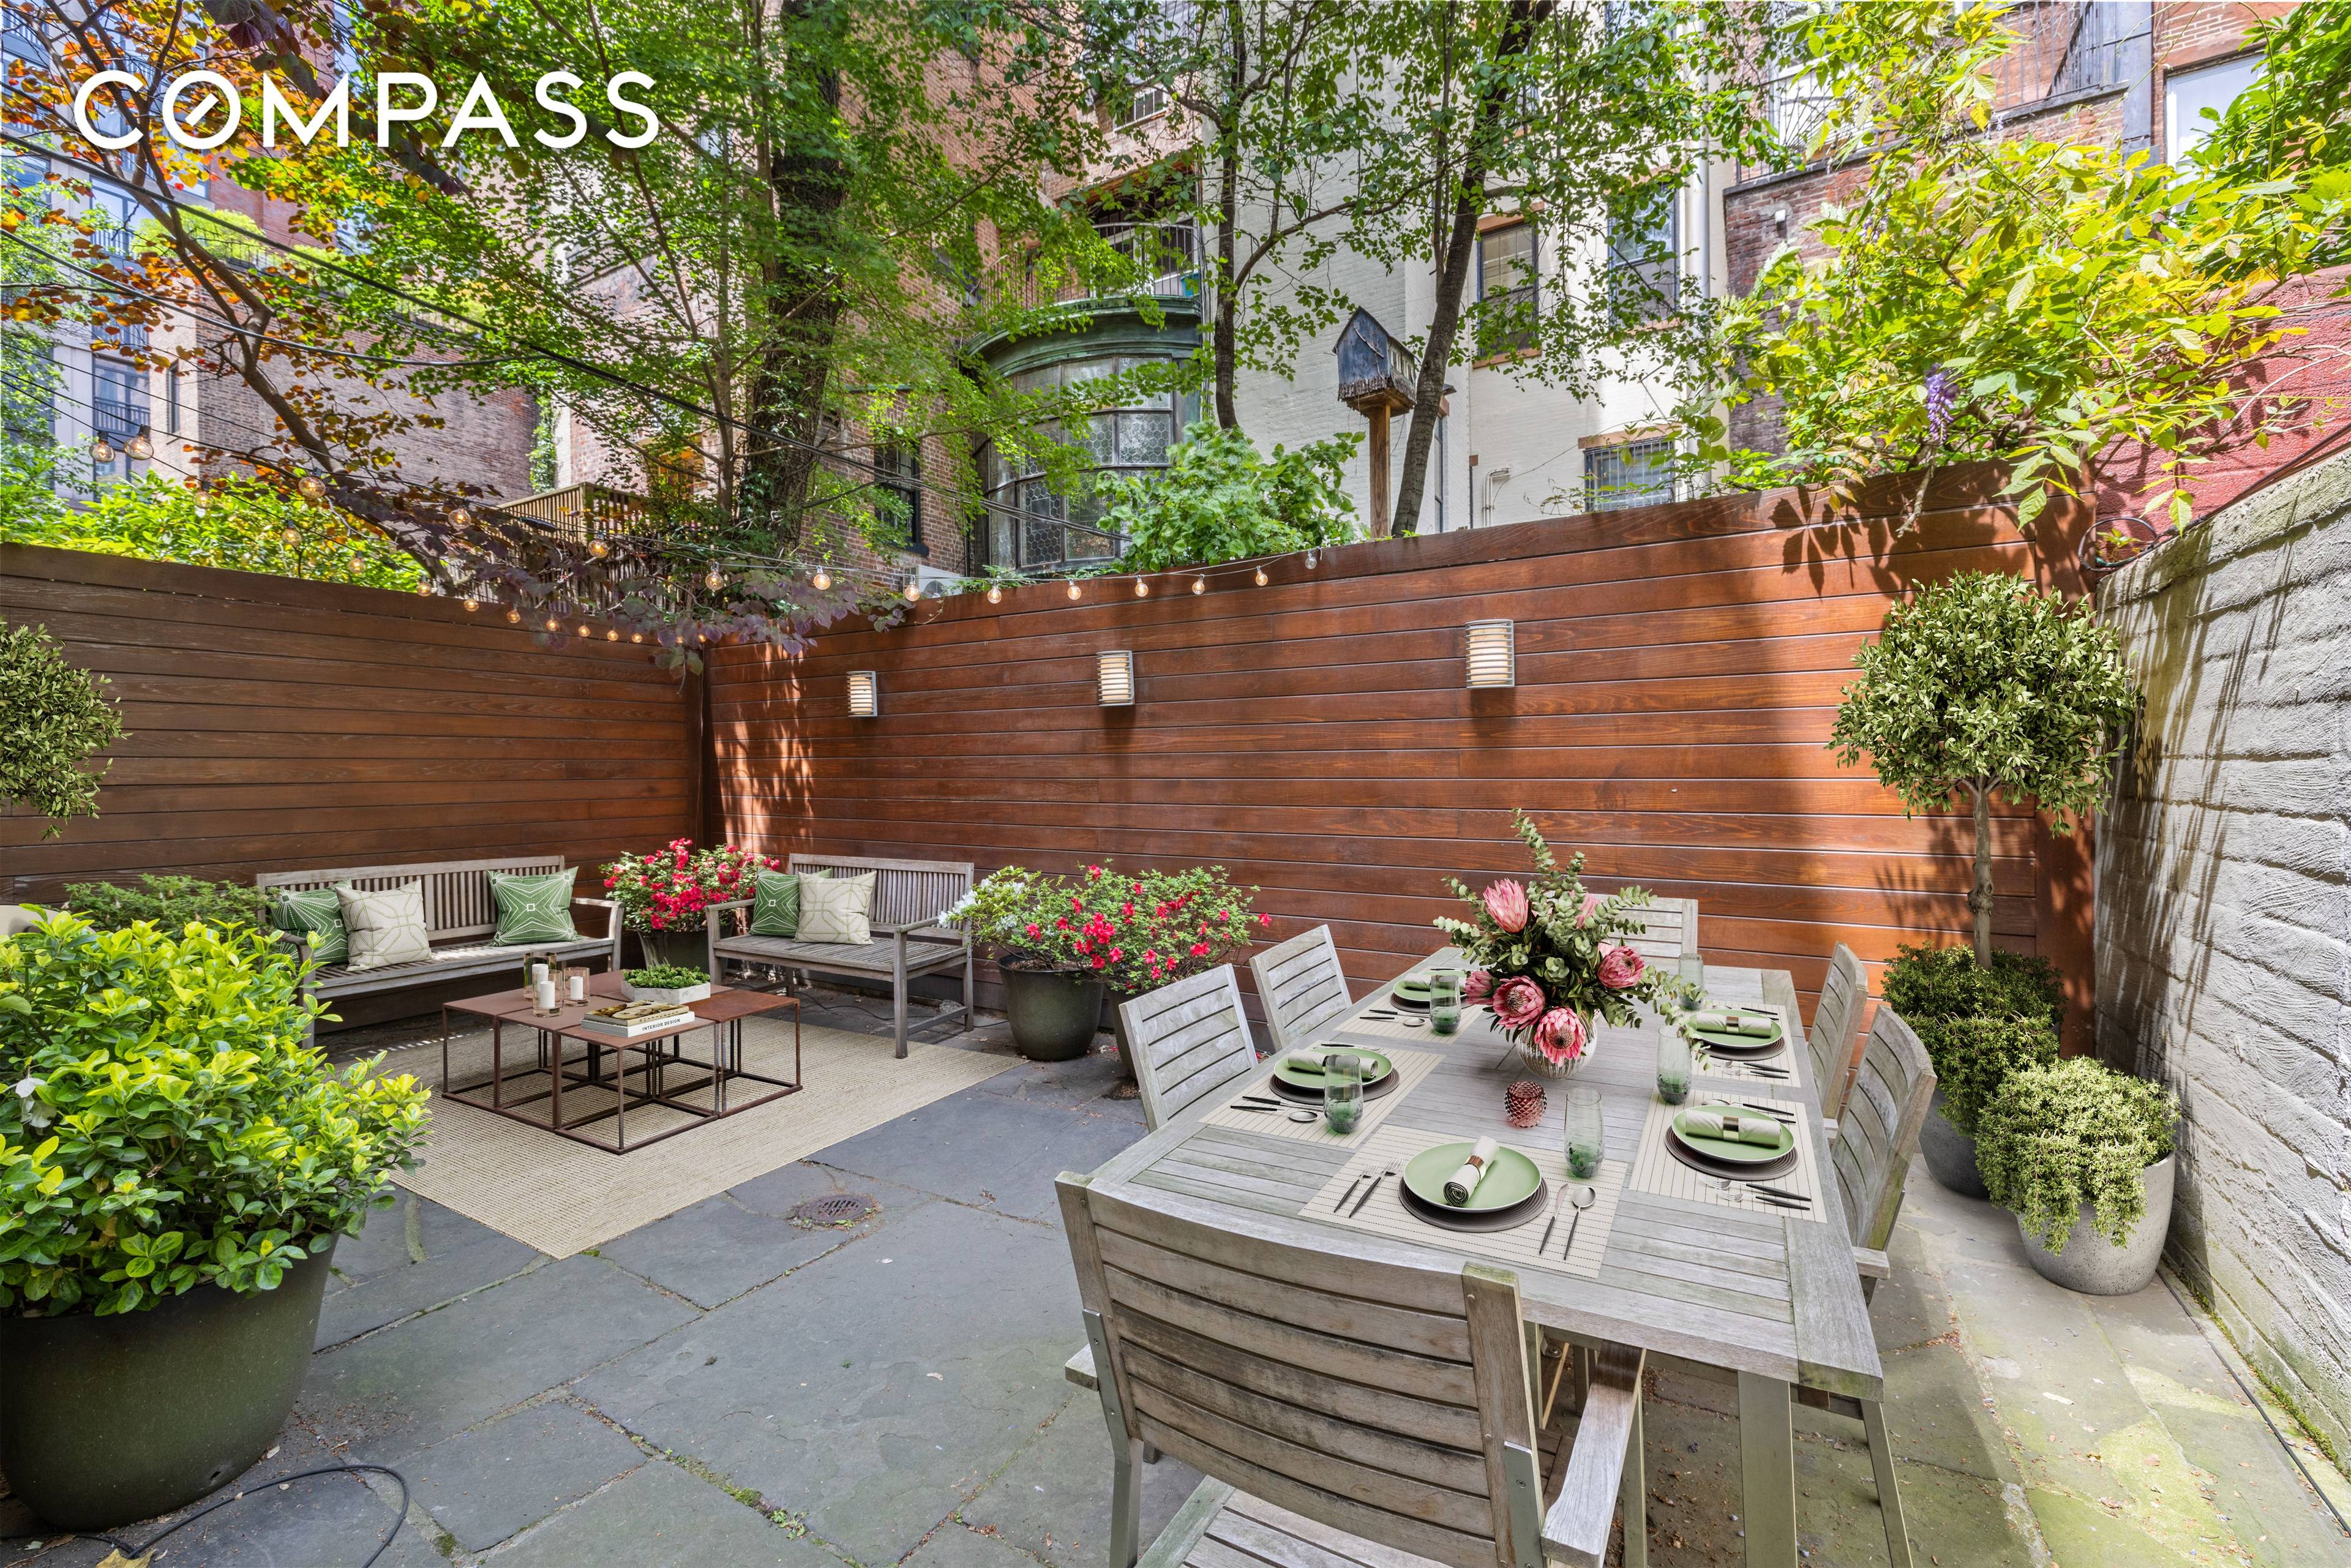 Beautifully renovated two bedroom, two bathroom garden apartment with over 550 sq ft of private outdoor space and two fireplaces.